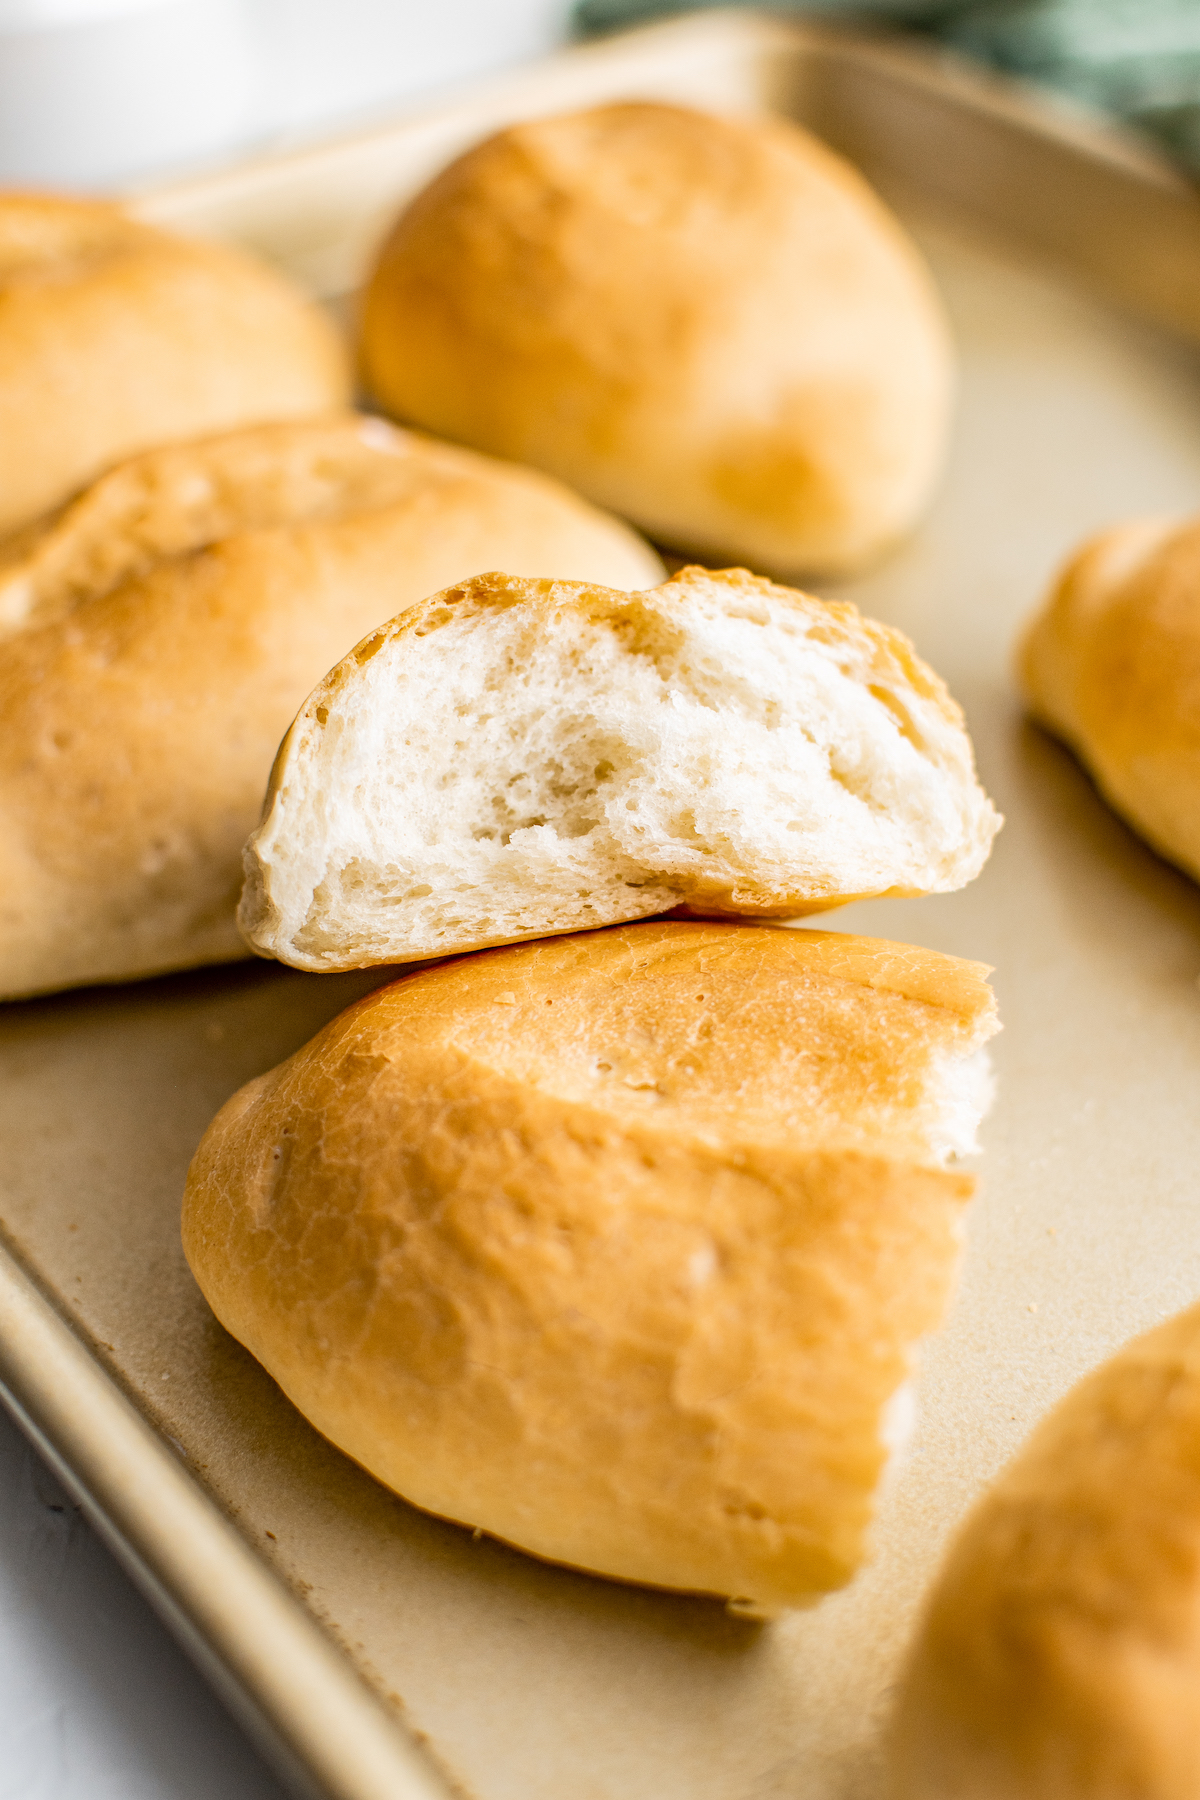 Bread rolls on a baking sheet. One roll has been broken open to show texture.